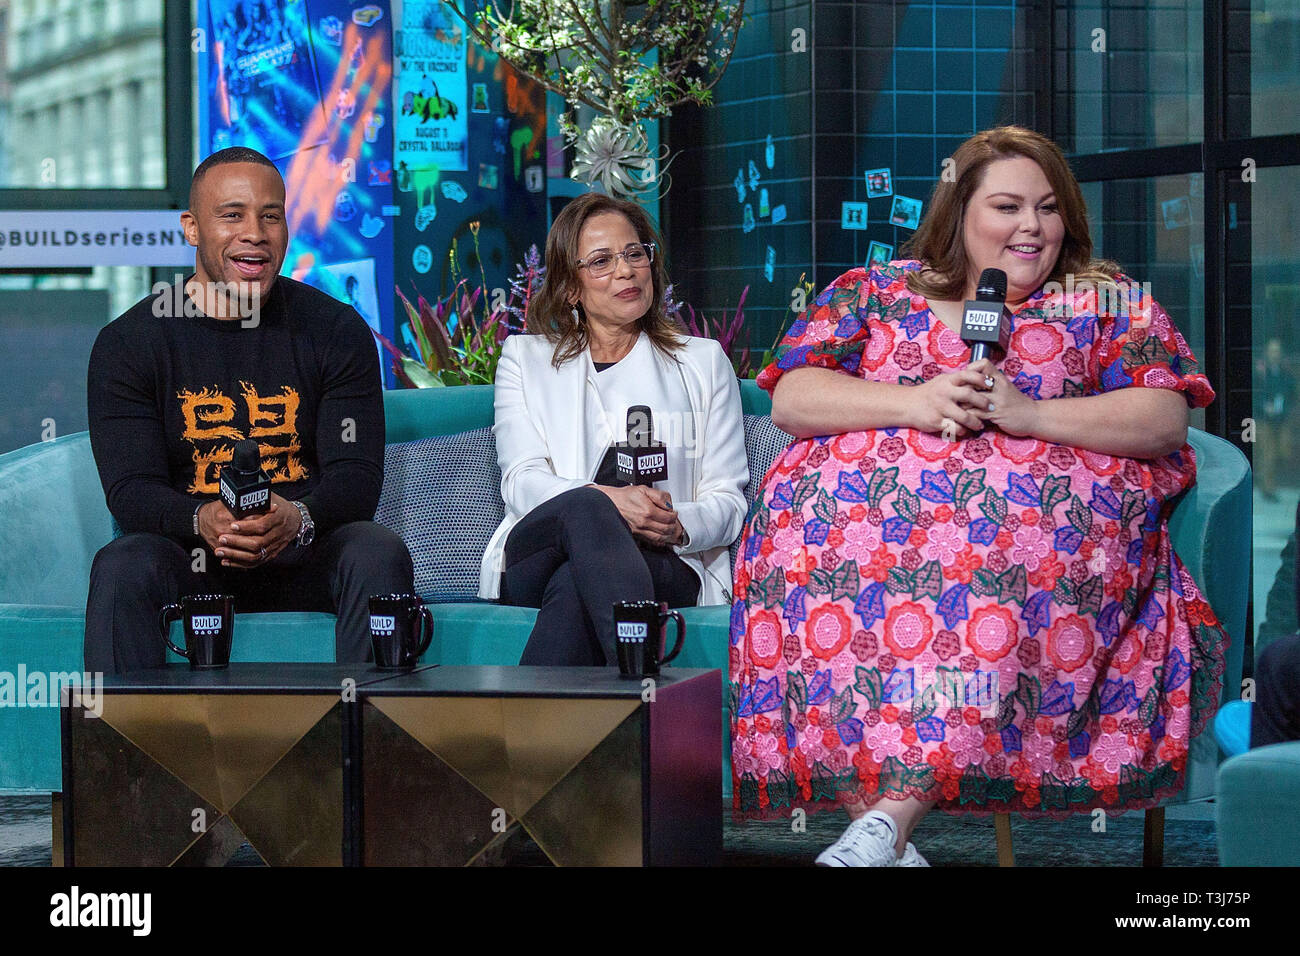 New York, USA. 09 Apr, 2019.  DeVon Franklin, Roxann Dawson, and, Chrissy Metz at The BUILD Series discussing “Breakthrough” at BUILD Studio on April 09, 2019 in New York, NY. Credit: Steve Mack/S.D. Mack Pictures/Alamy Stock Photo